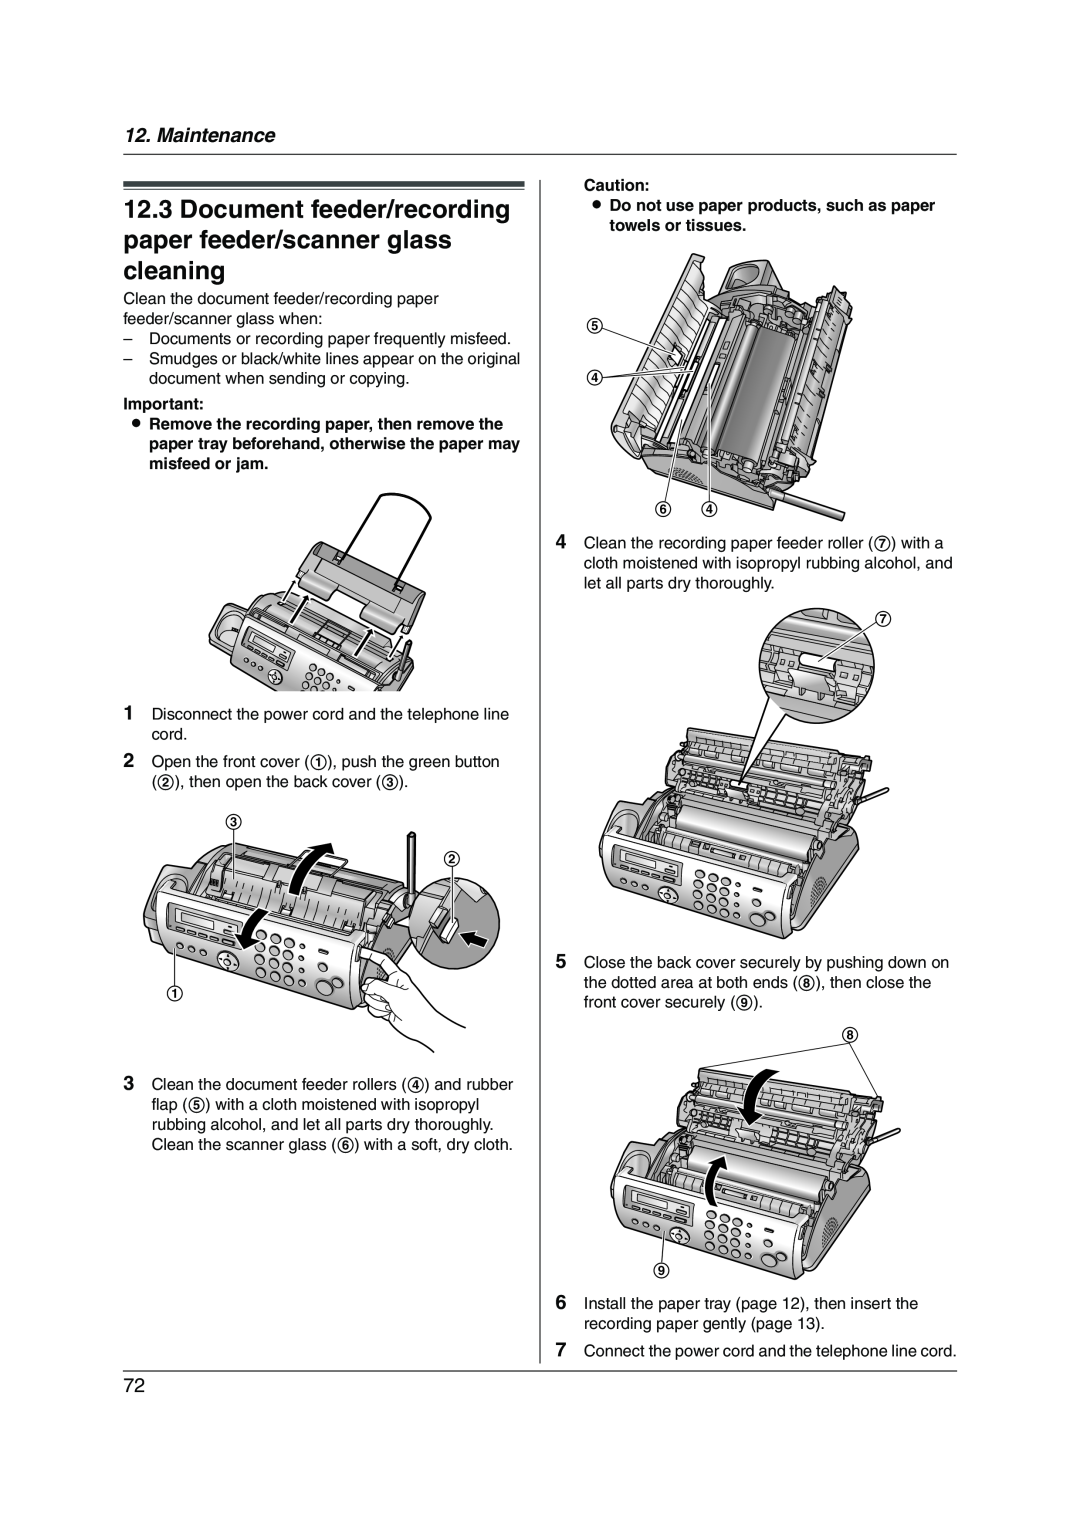 Panasonic KX-FC228HK operating instructions Document feeder/recording paper feeder/scanner glass cleaning, Maintenance 